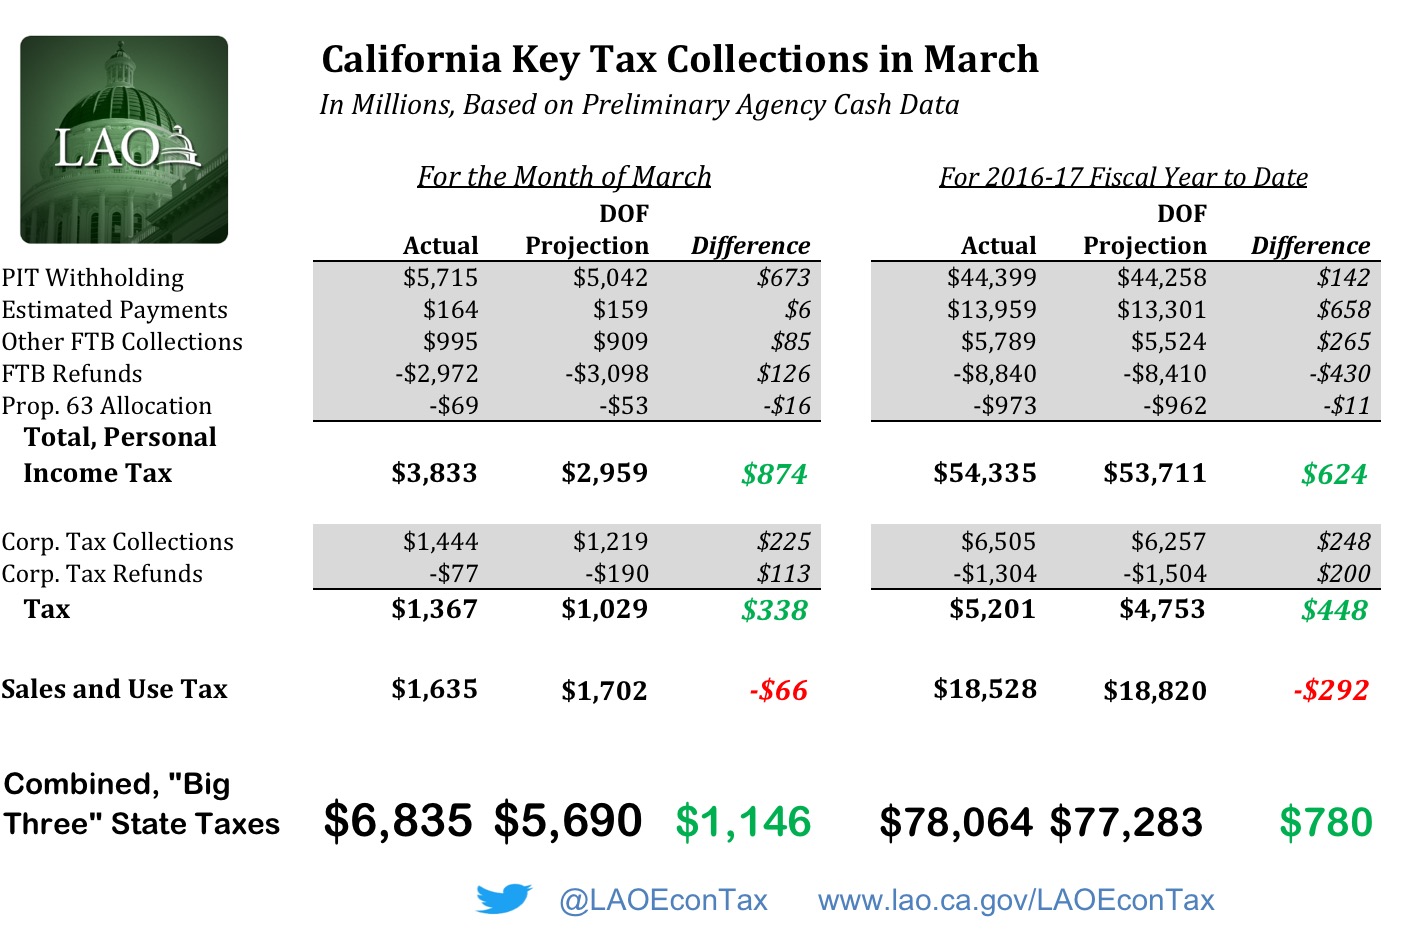 Table showing preliminary tax agency data on California income and sales tax collections in March.